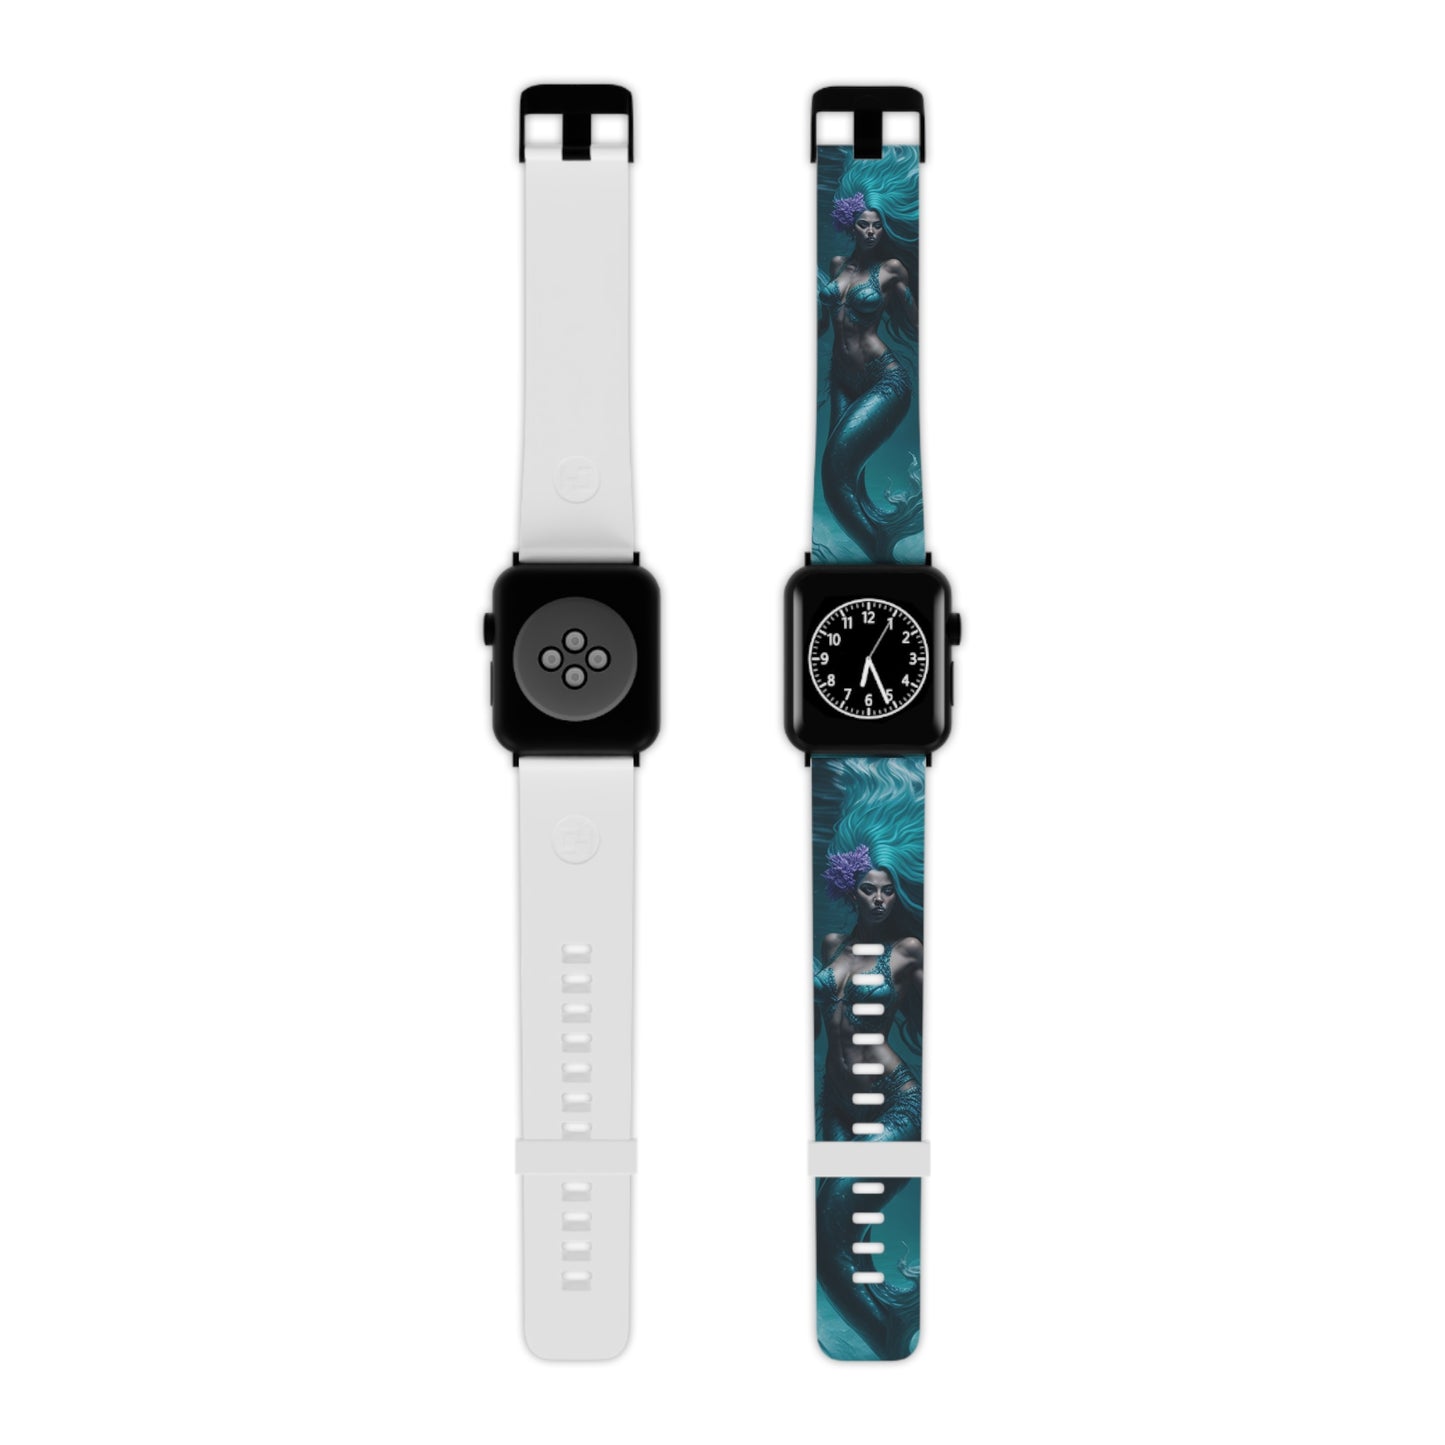 Mermaid Apple Watch Band, Professional-Grade Thermo Elastomer Material | Compatible with Apple Watch Series 1-8 & SE, Great Gift, Man, Woman